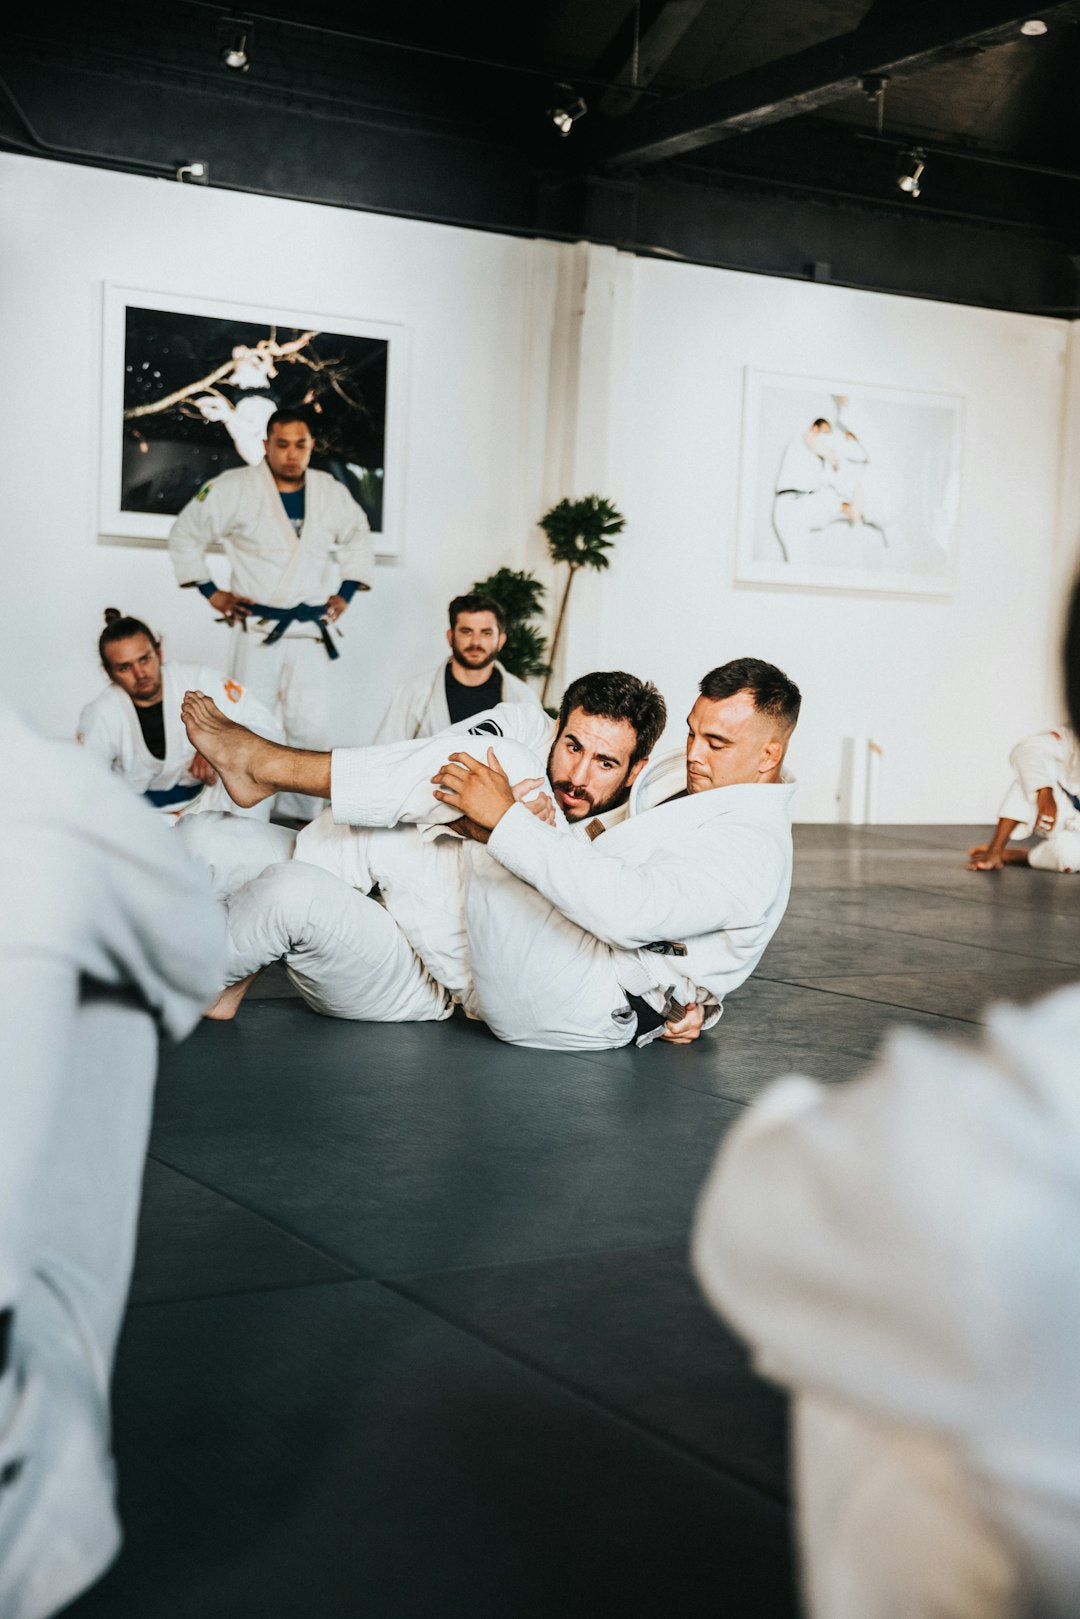 Mastering Martial Arts: Essential Training Tips to Level Up Your Skills